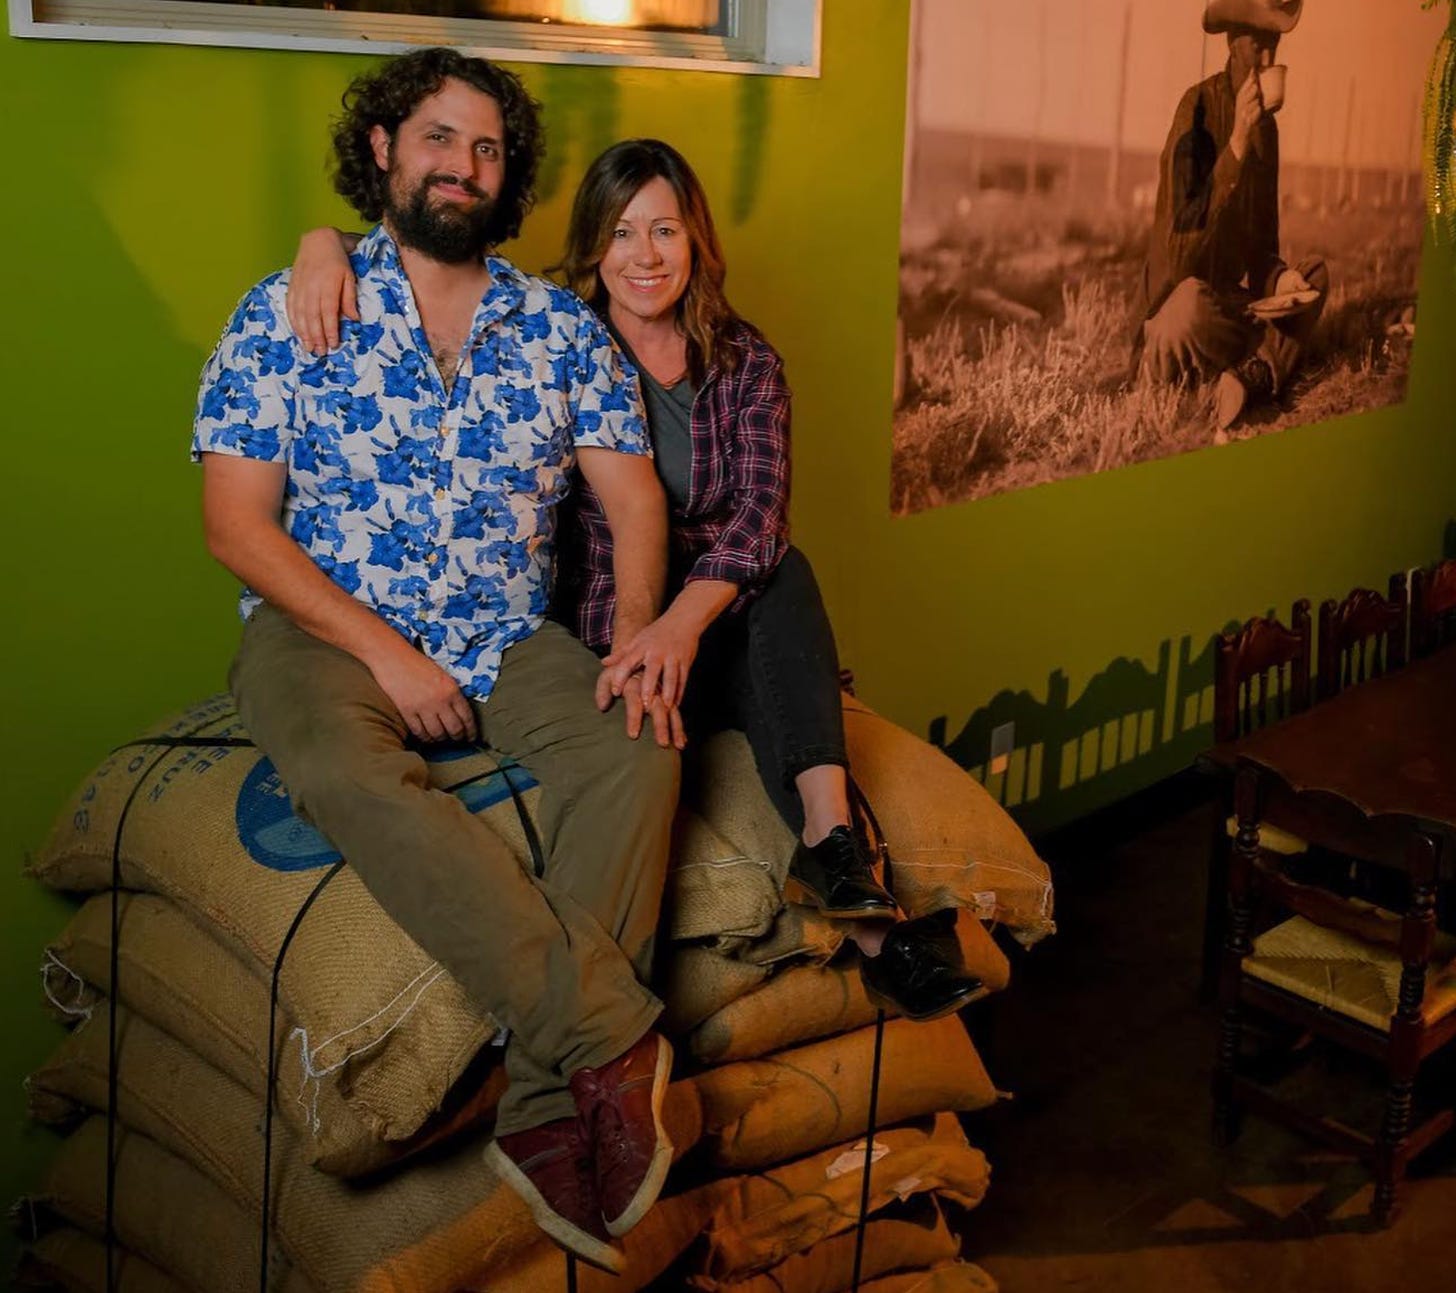 Samantha and Weston Nawrocki, owners of Manzanita Roasting, sitting on a stack of coffee bags in front of a green wall.